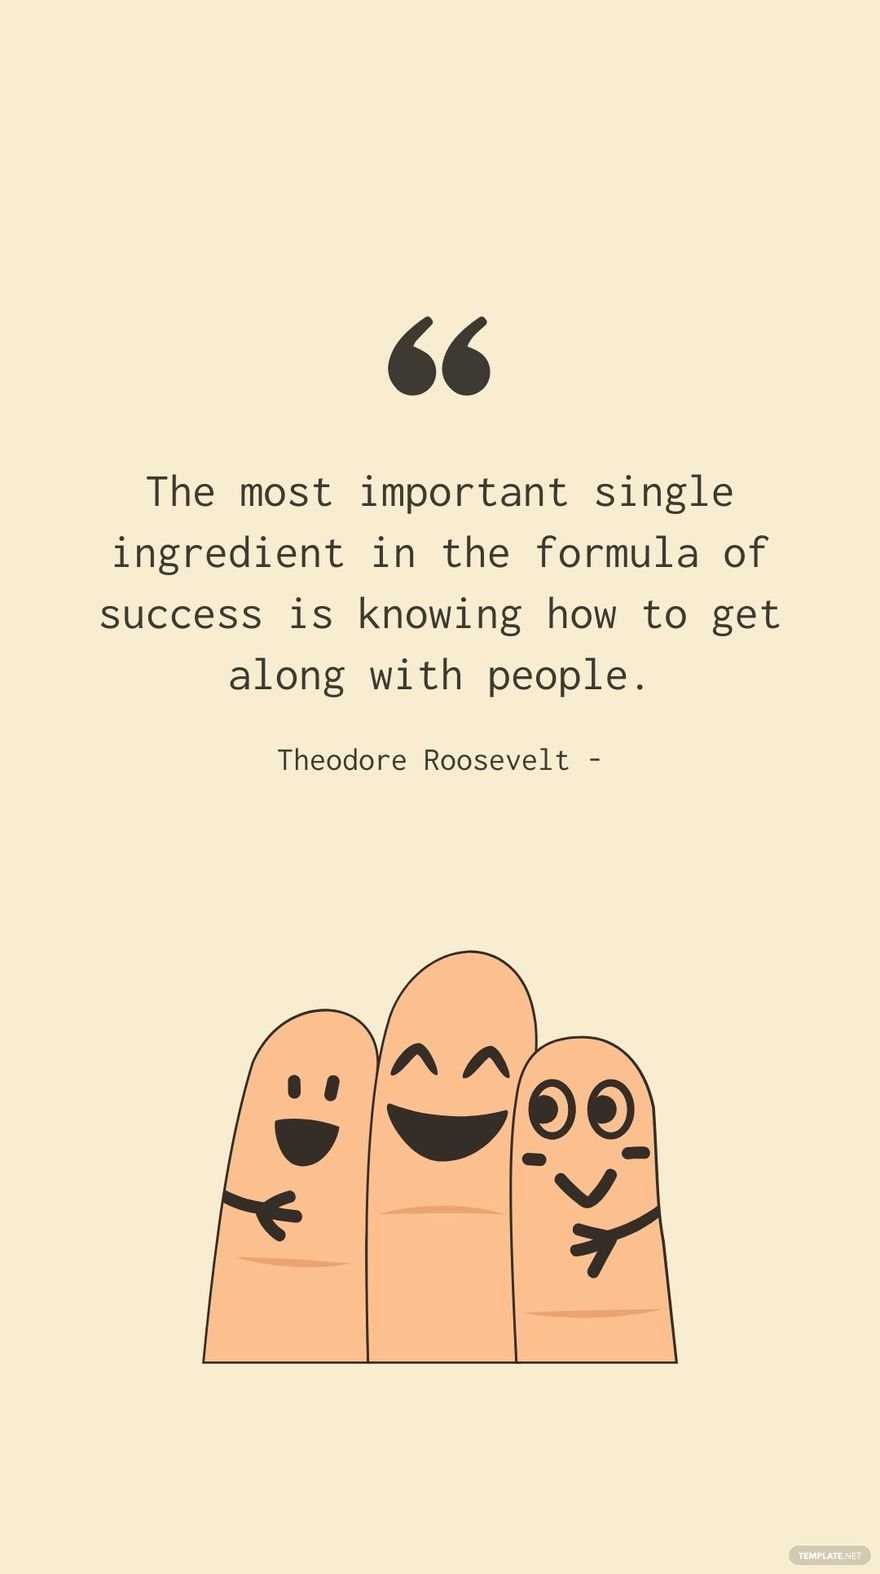 Theodore Roosevelt - The most important single ingredient in the formula of success is knowing how to get along with people.